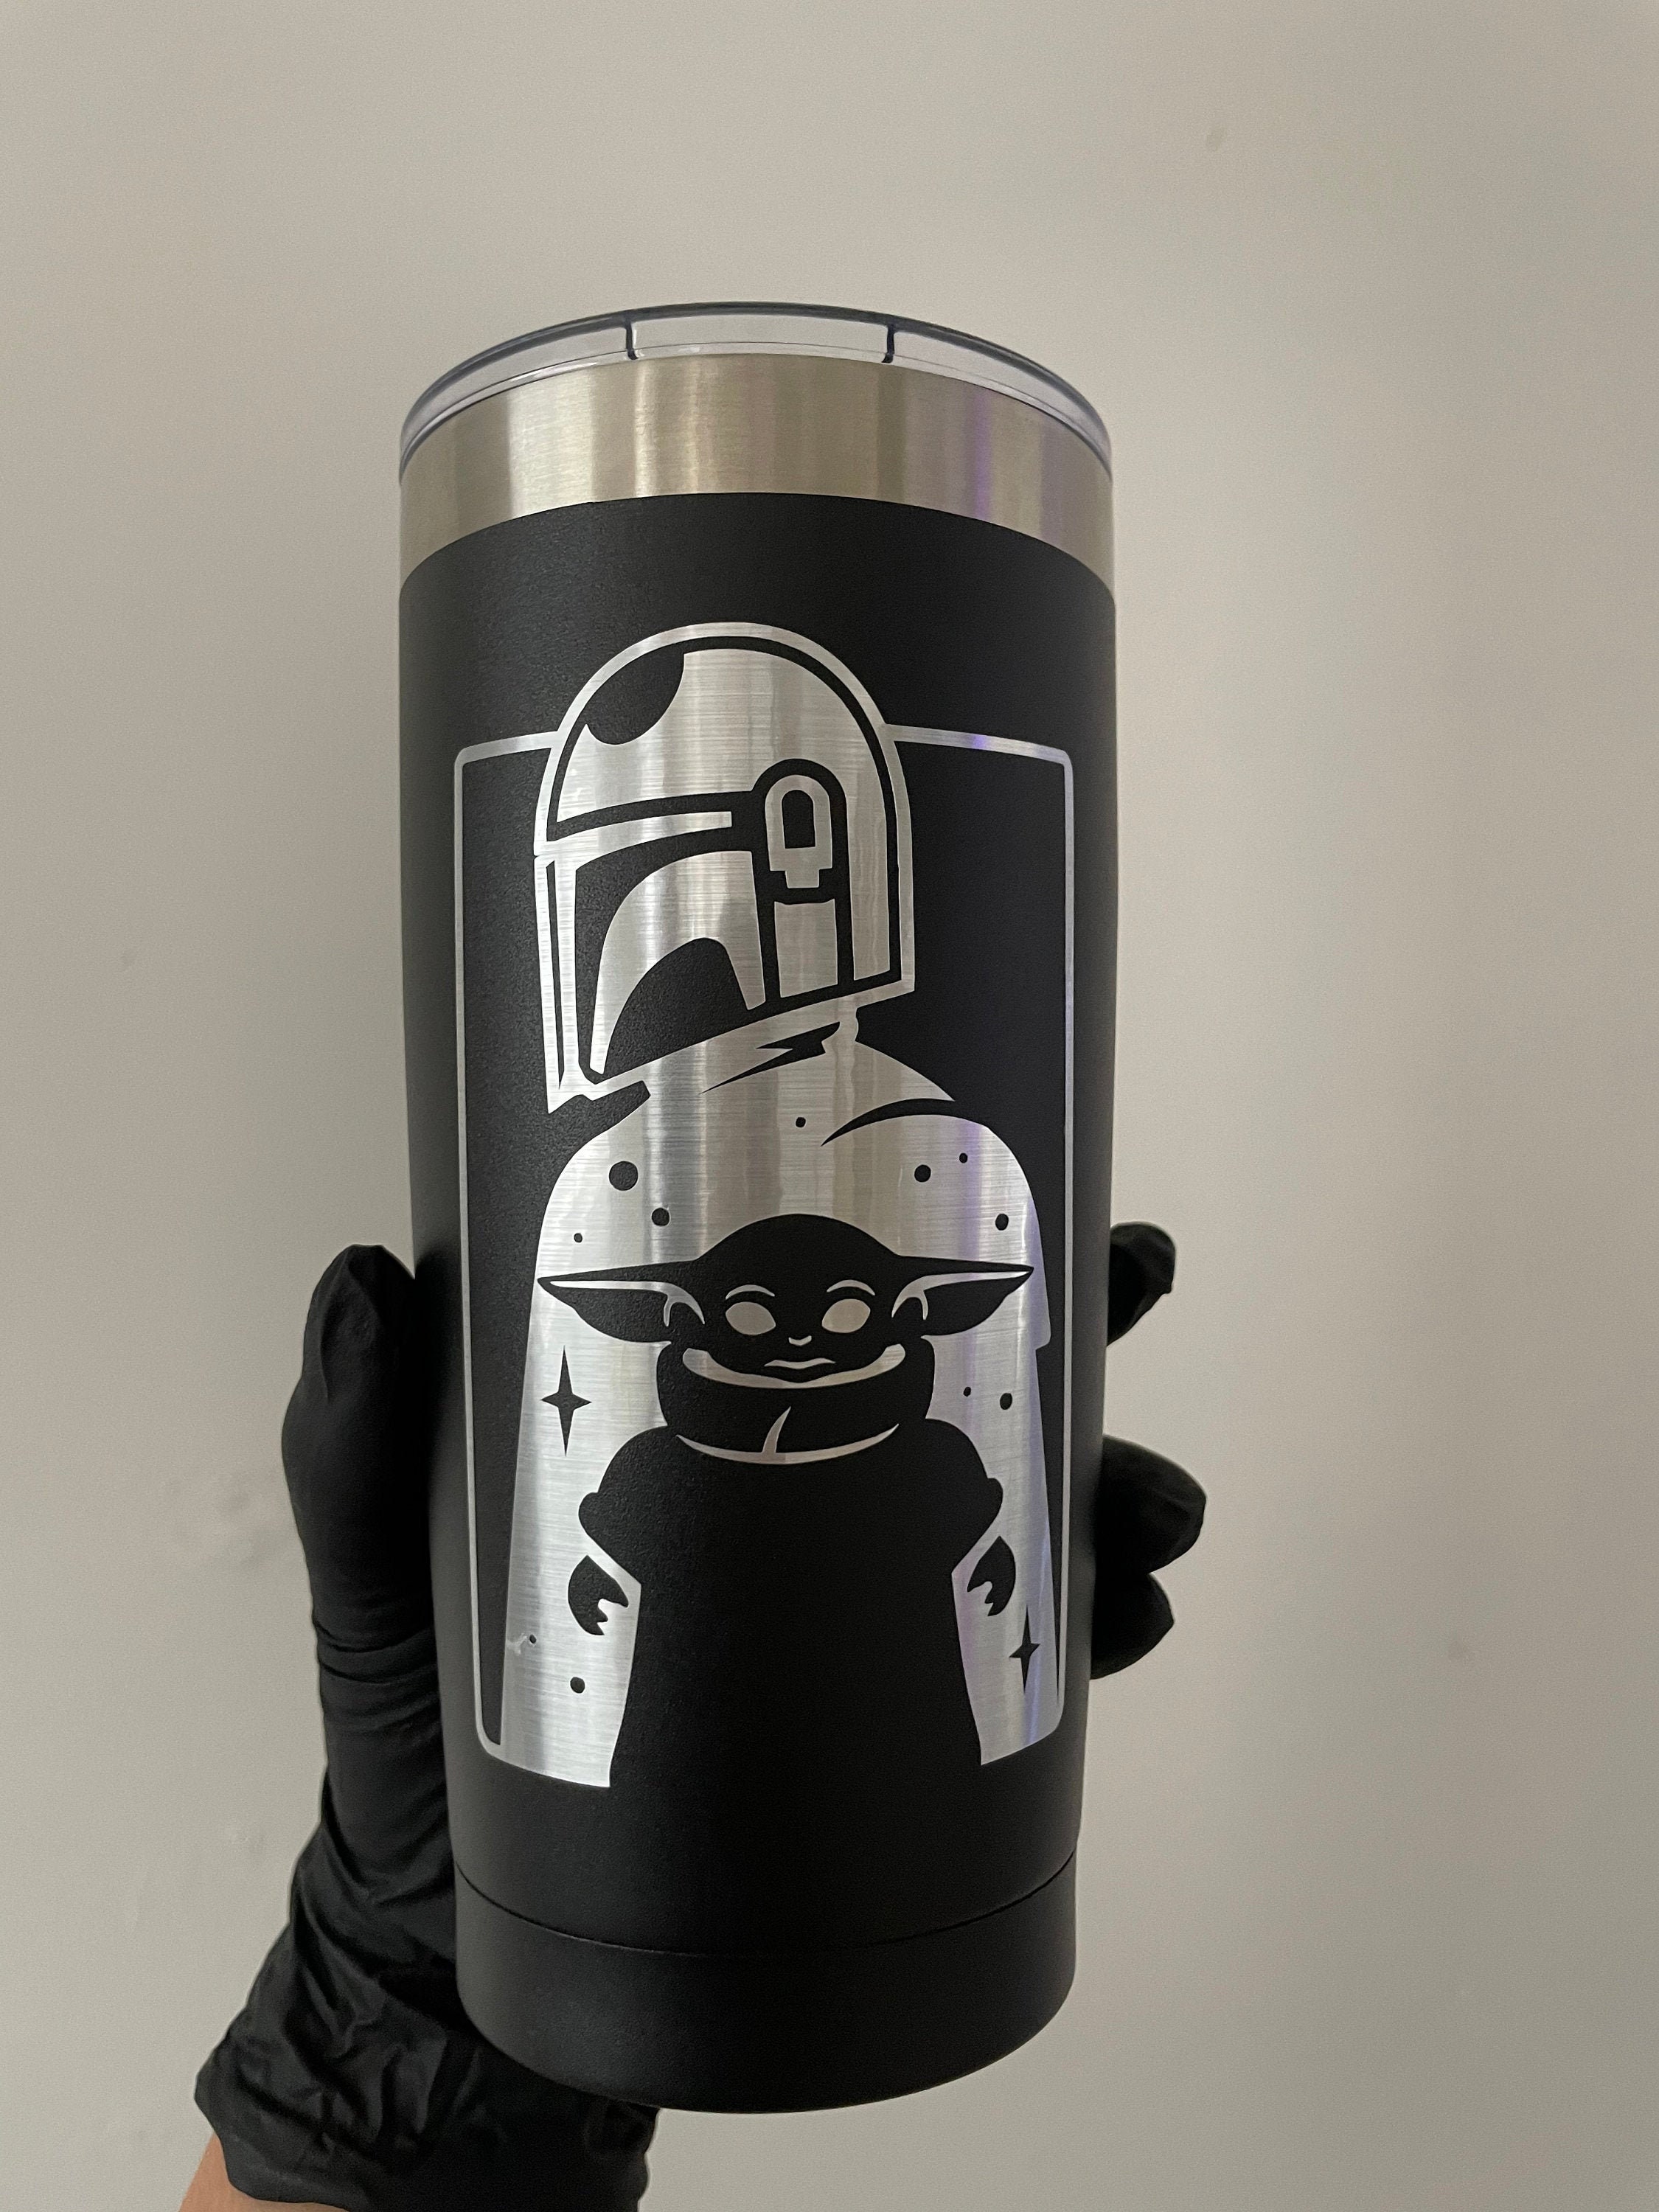 Star Wars Thermos Funtainer Drink Bottle - R2-D2 BB-8 Lucas Film 12oz  Stainless